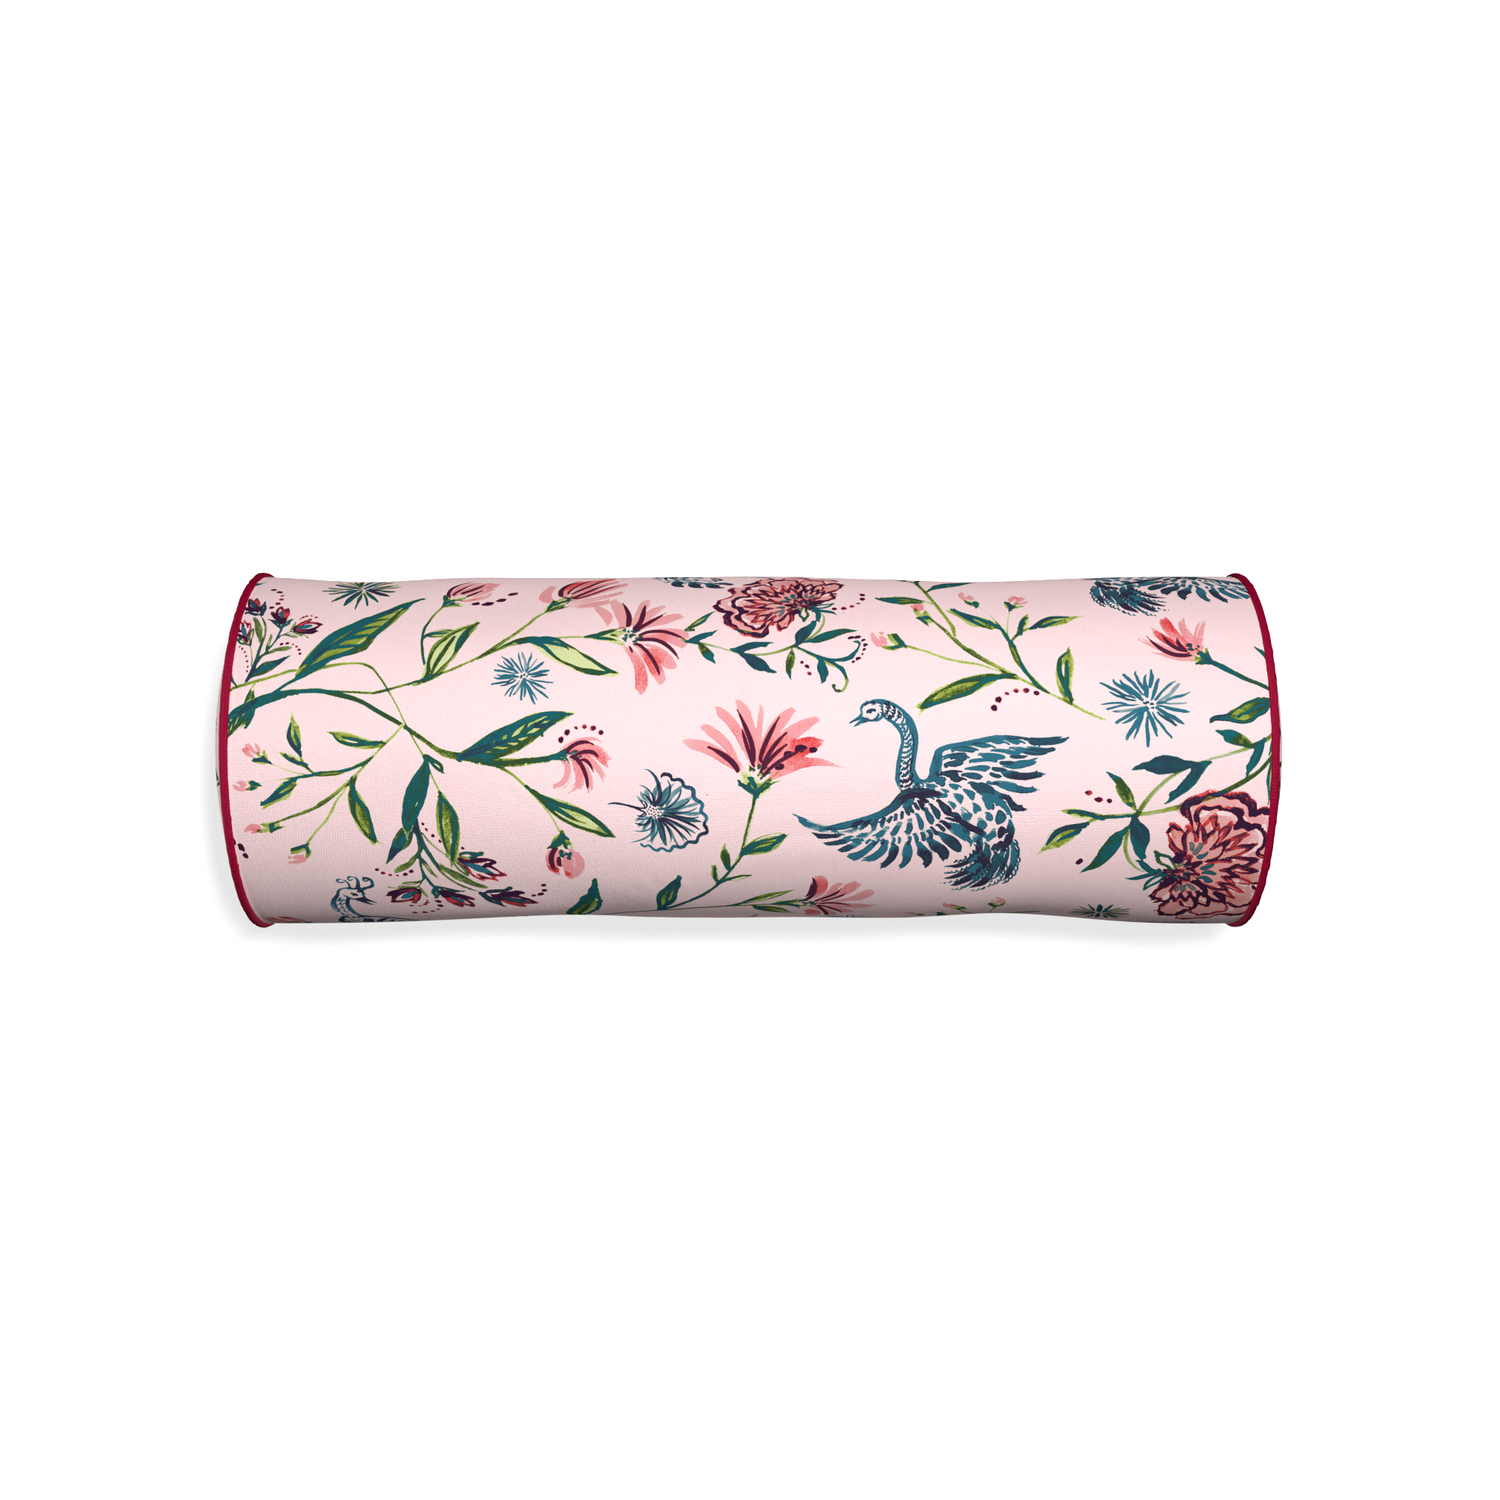 Bolster daphne rose custom rose chinoiseriepillow with raspberry piping on white background